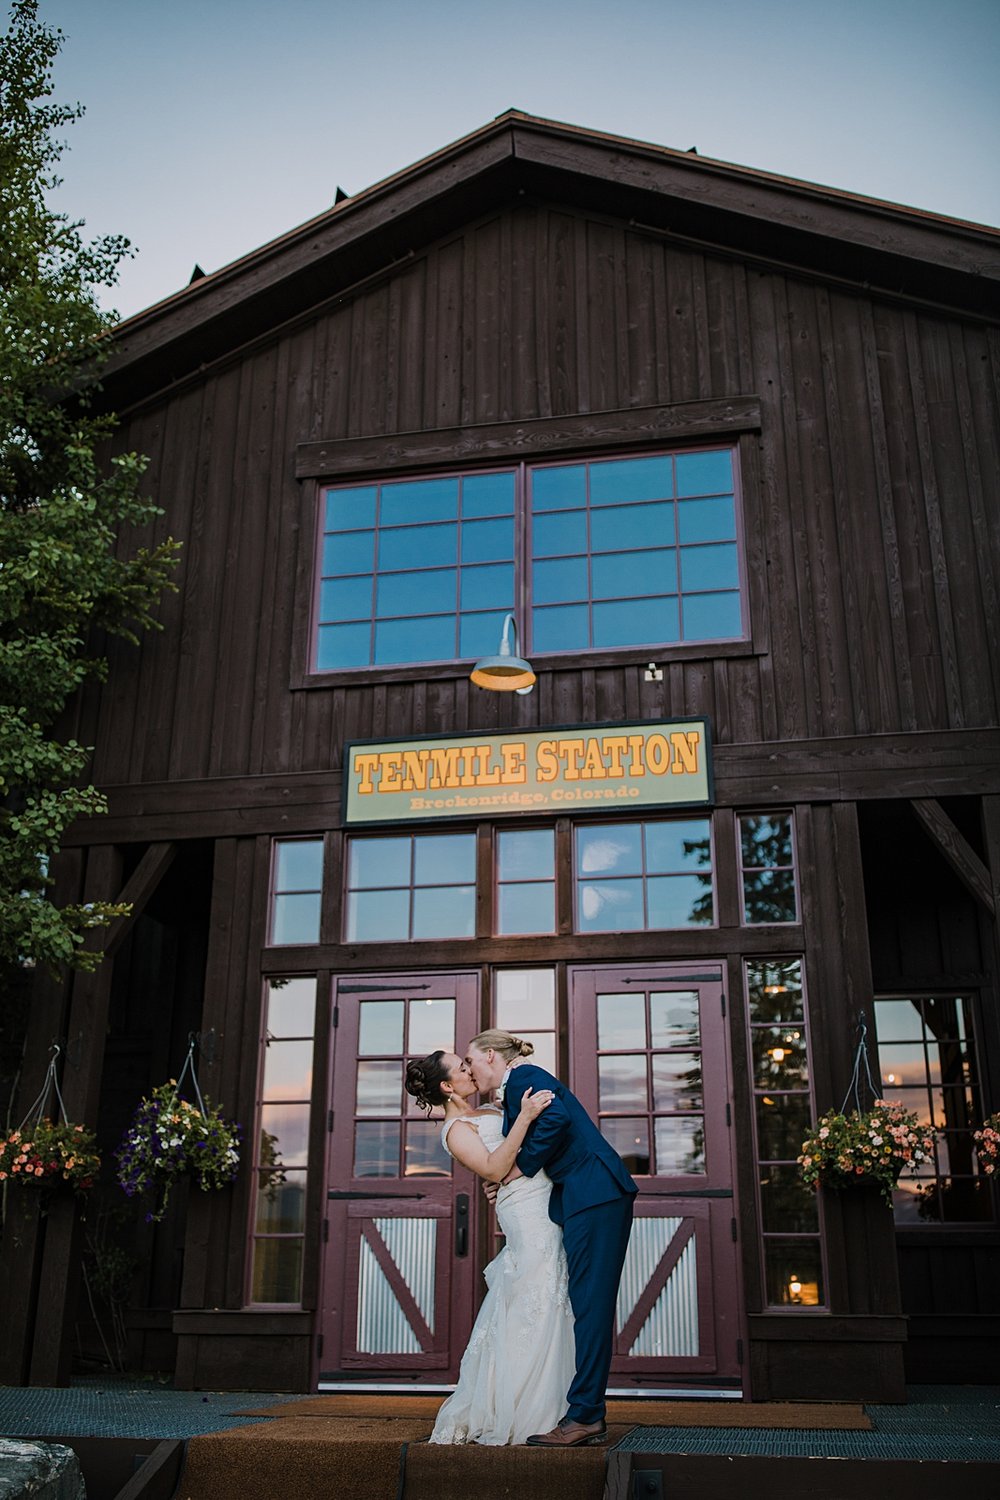 bride and groom kissing at sunset, tenmile station wedding, breckenridge tenmile station wedding, breckenridge resort wedding venues, breckenridge resort wedding, sunset reflecting off tenmile station